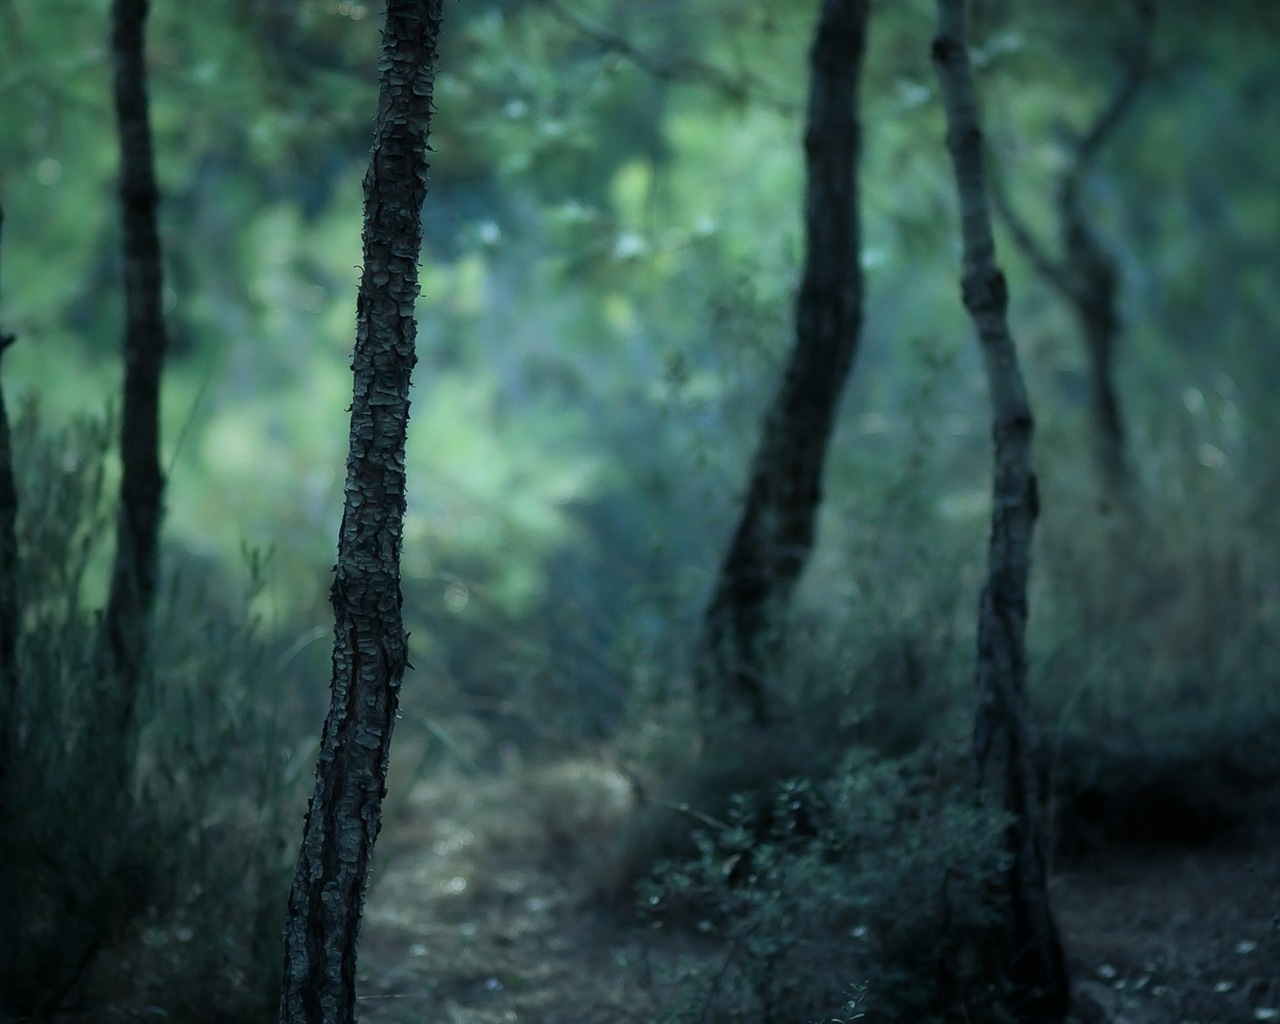 Windows 8 theme forest scenery HD wallpapers #7 - 1280x1024